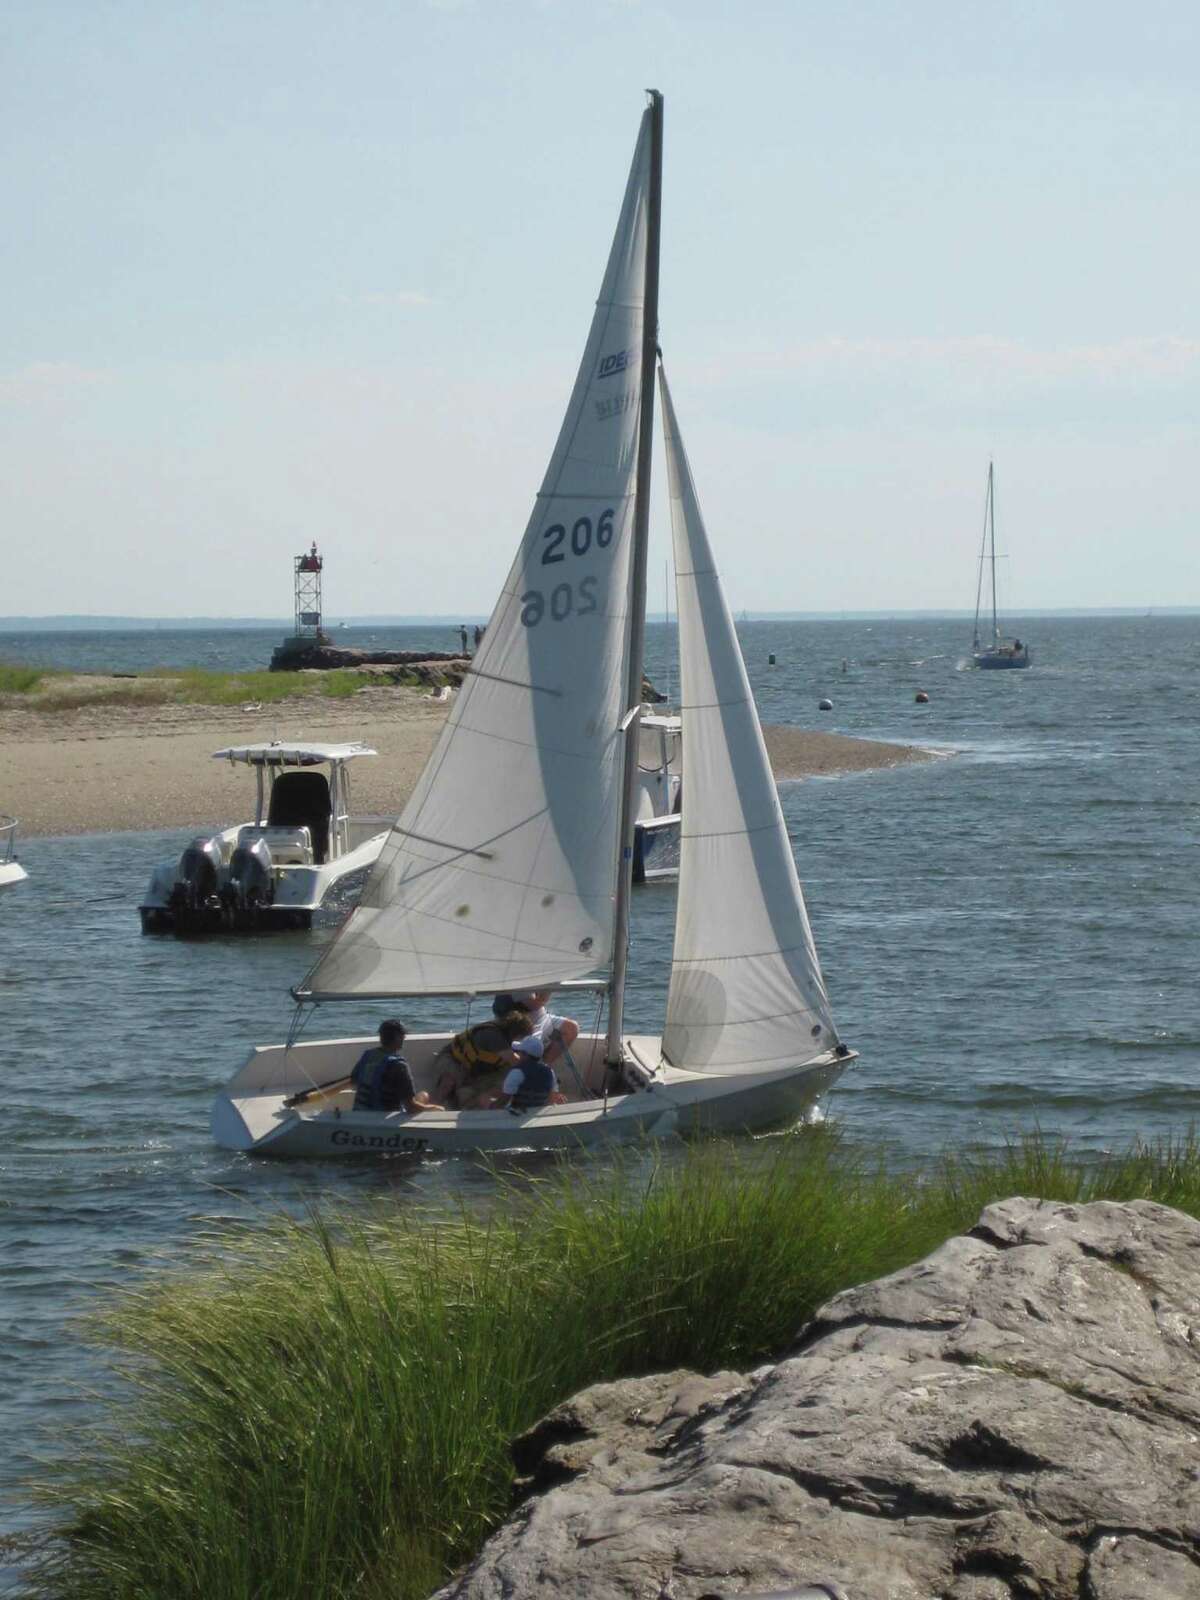 A group of experienced sailing, and kayaking enthusiasts, Community Sailing of Fairfield, is going to host a free, three part, open to the public, and safe sailing seminar series with safety seminars on the following select dates, and times. They are: Tuesdays, April 19, April 26, and May 3, at 7 p.m., at the Fairfield Recreation Center in the town, with a photo for the series, shown.